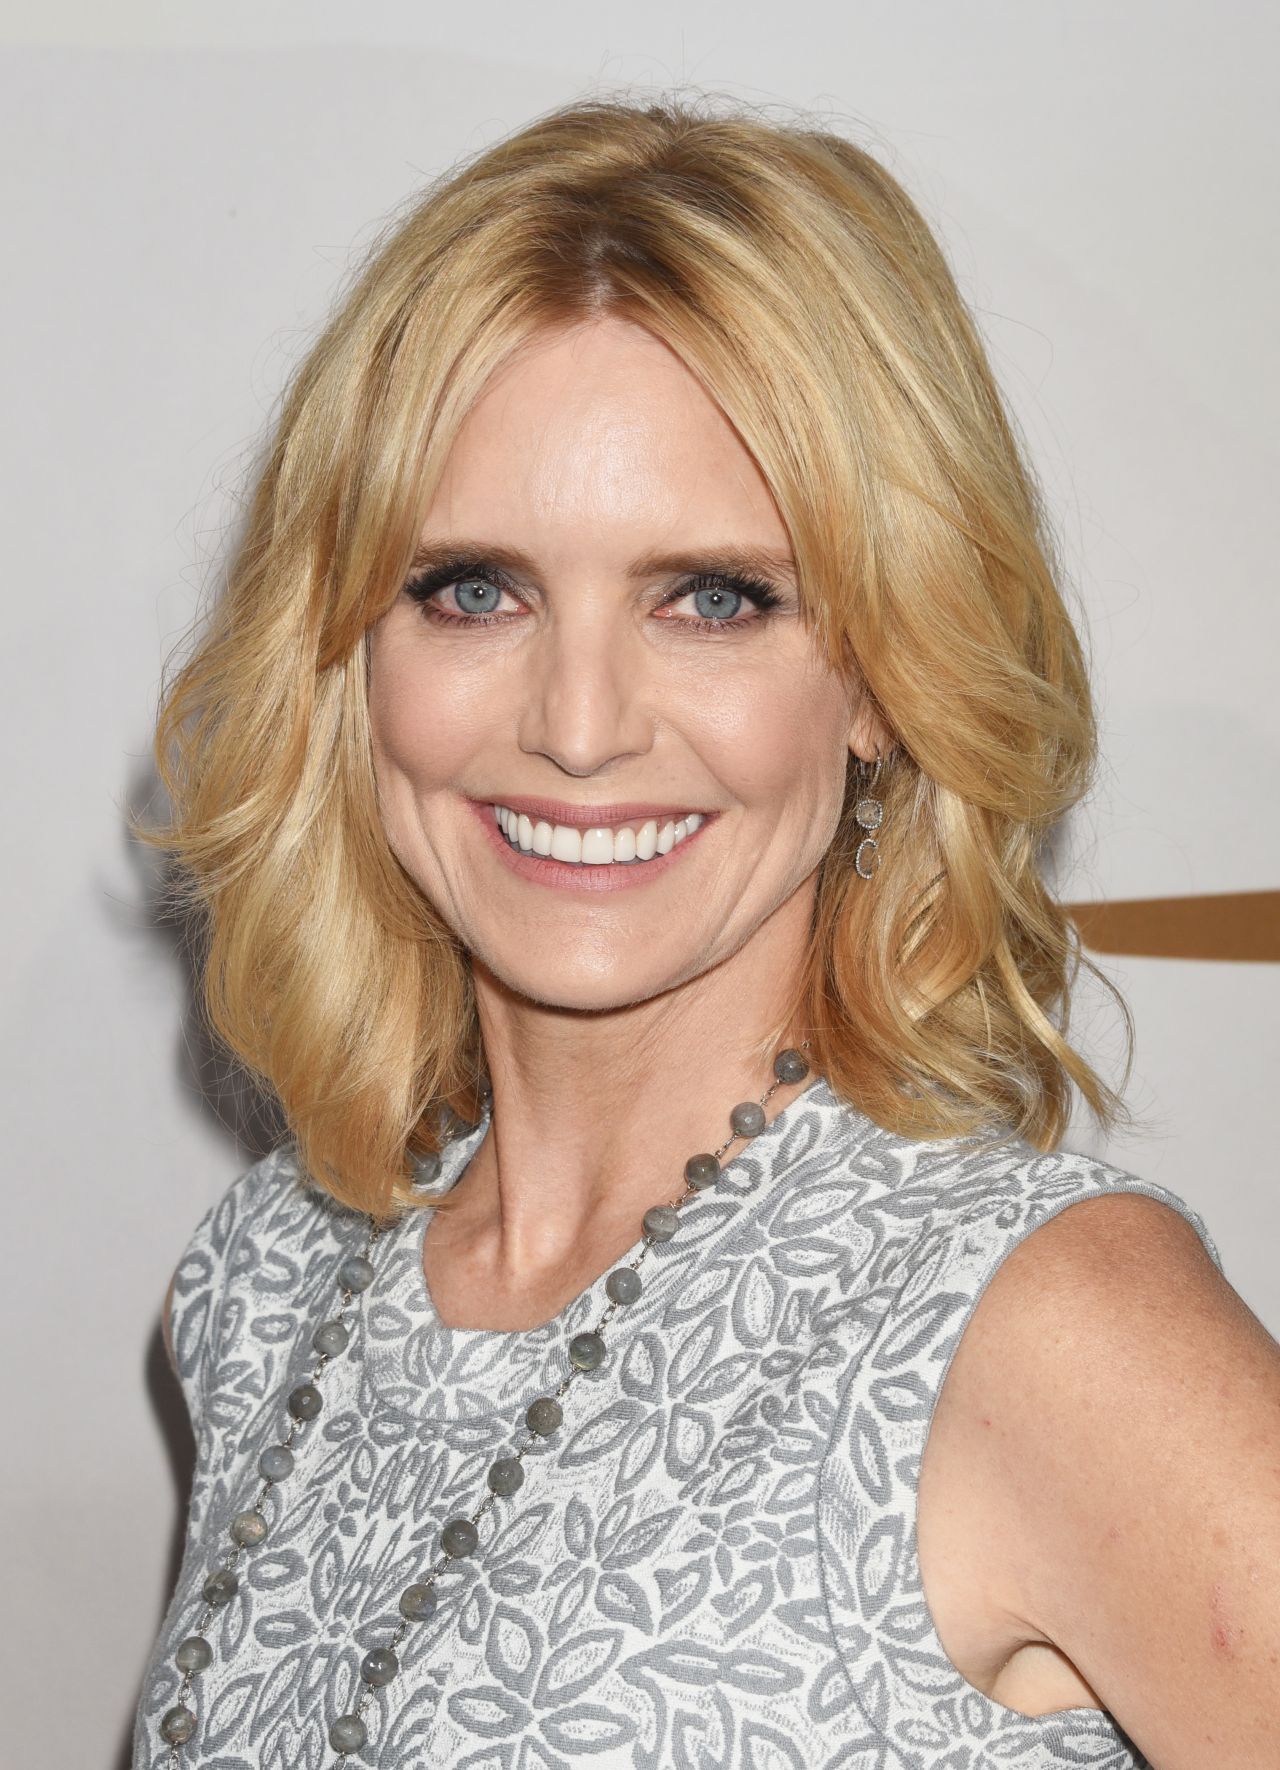 Courtney thorne smith pictures